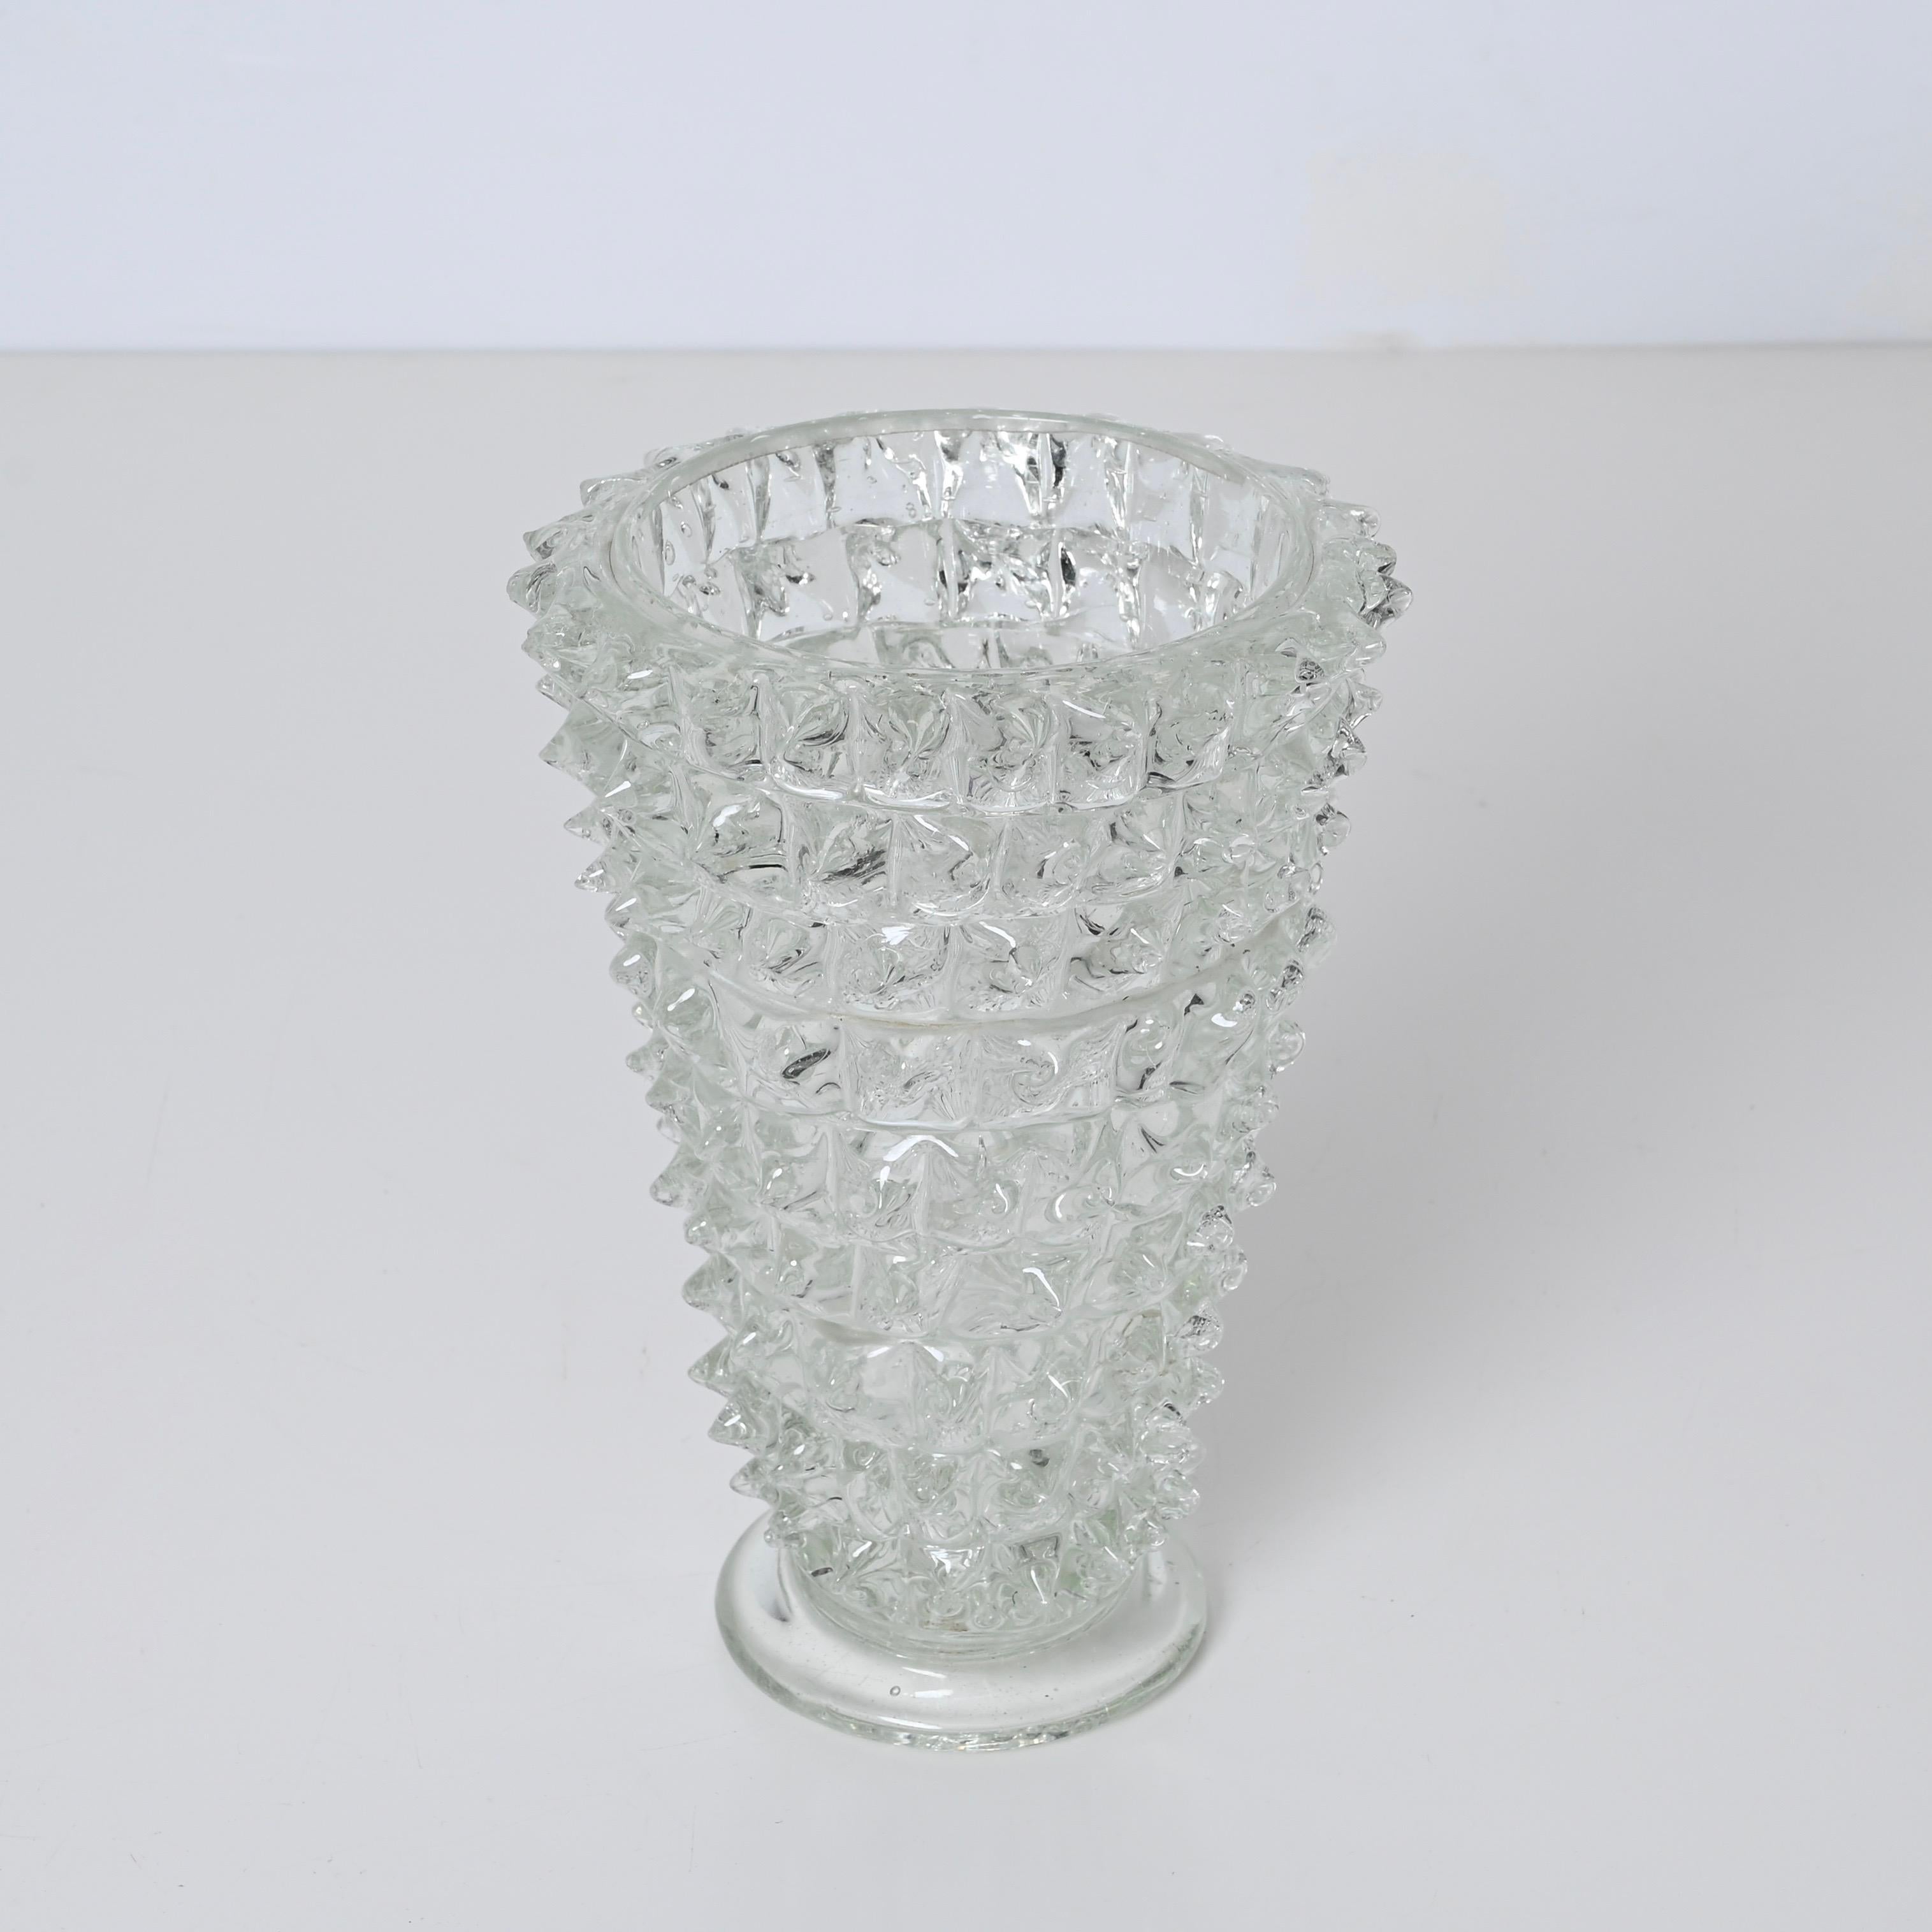 Rostrato Murano Glass Vase by Ercole Barovier for Barovier & Toso, Italy 1940s 11